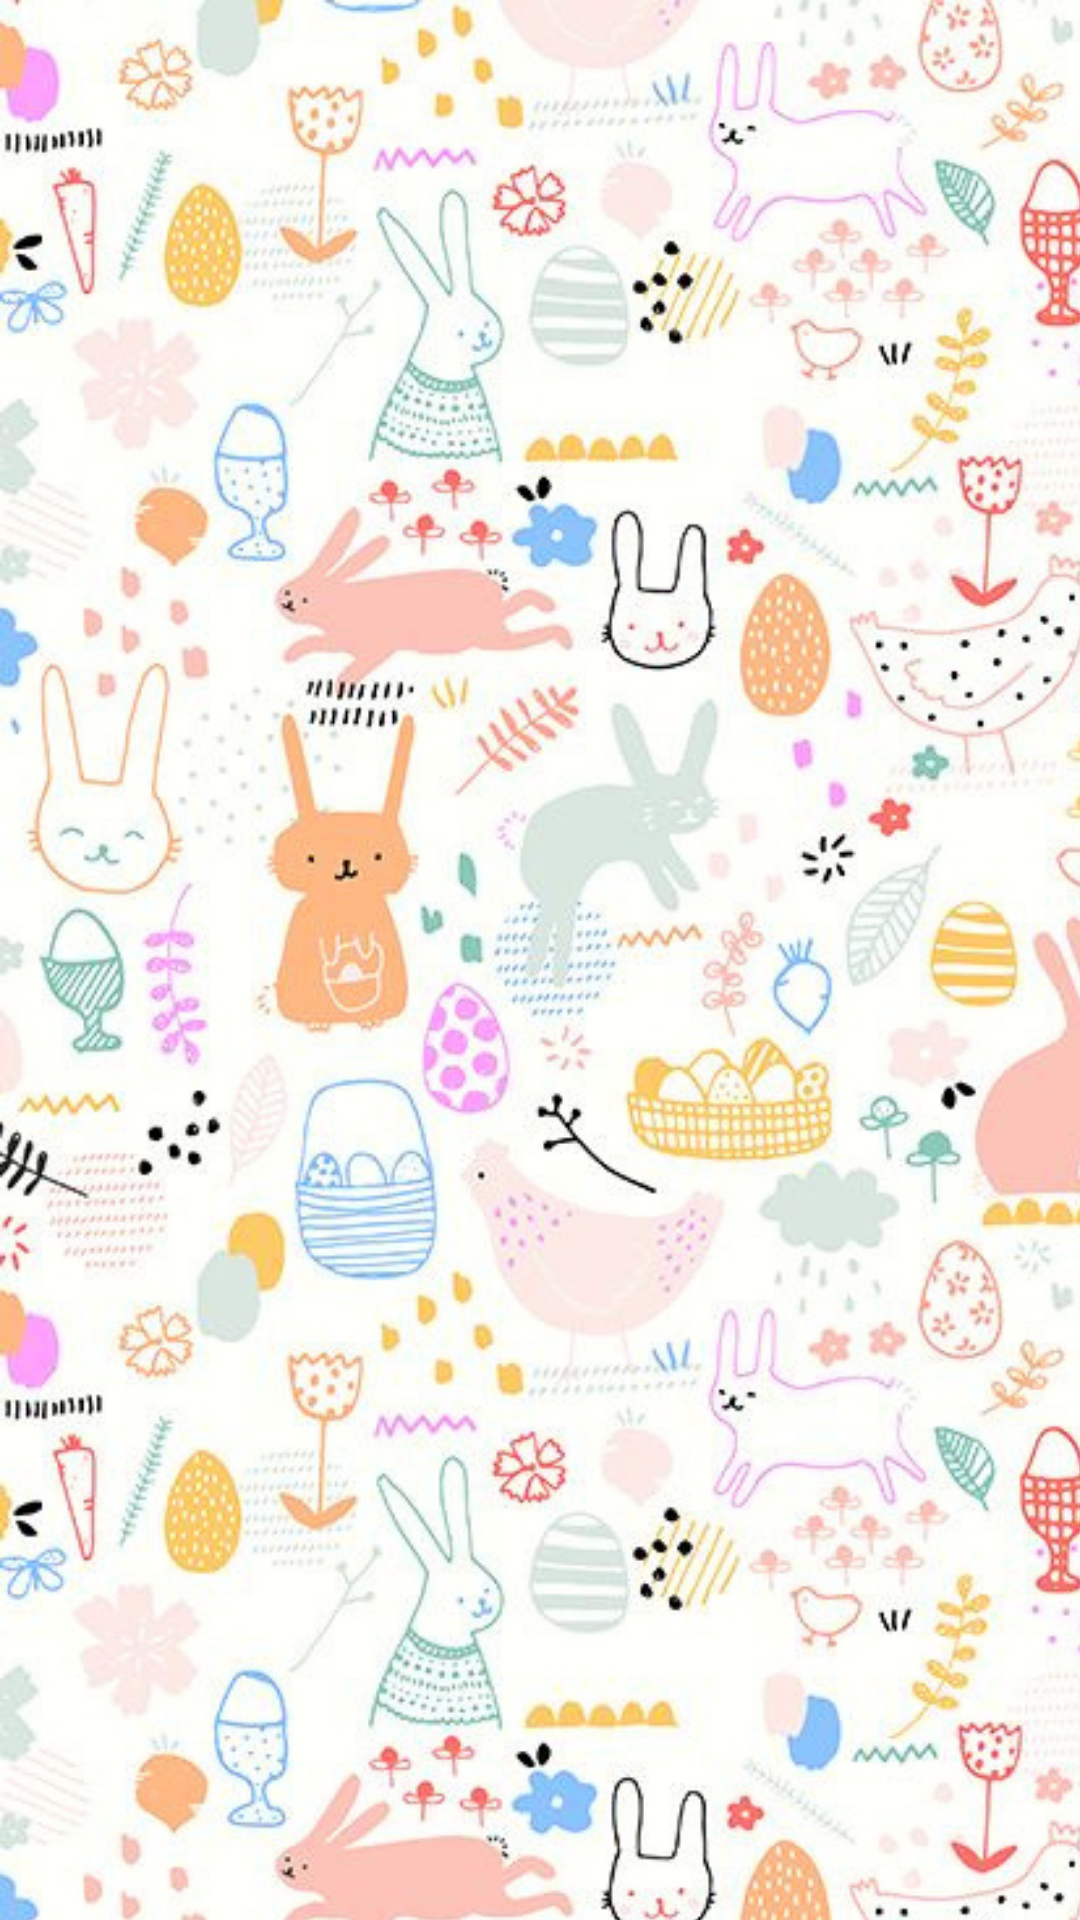 Wallpaper ID 306558  Holiday Easter Phone Wallpaper Easter Egg  1440x3120 free download